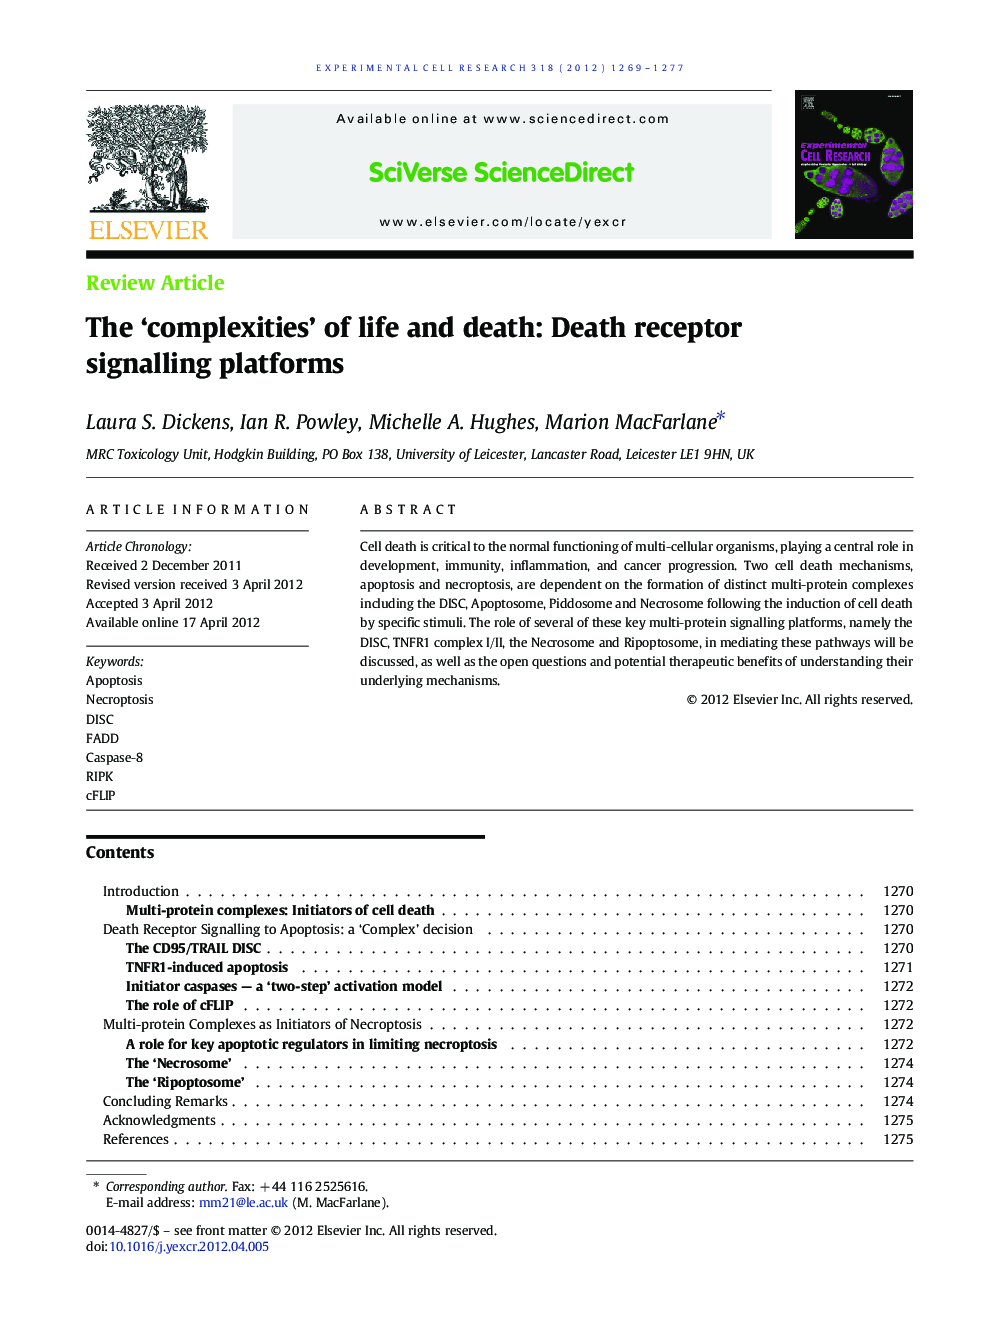 The 'complexities' of life and death: Death receptor signalling platforms